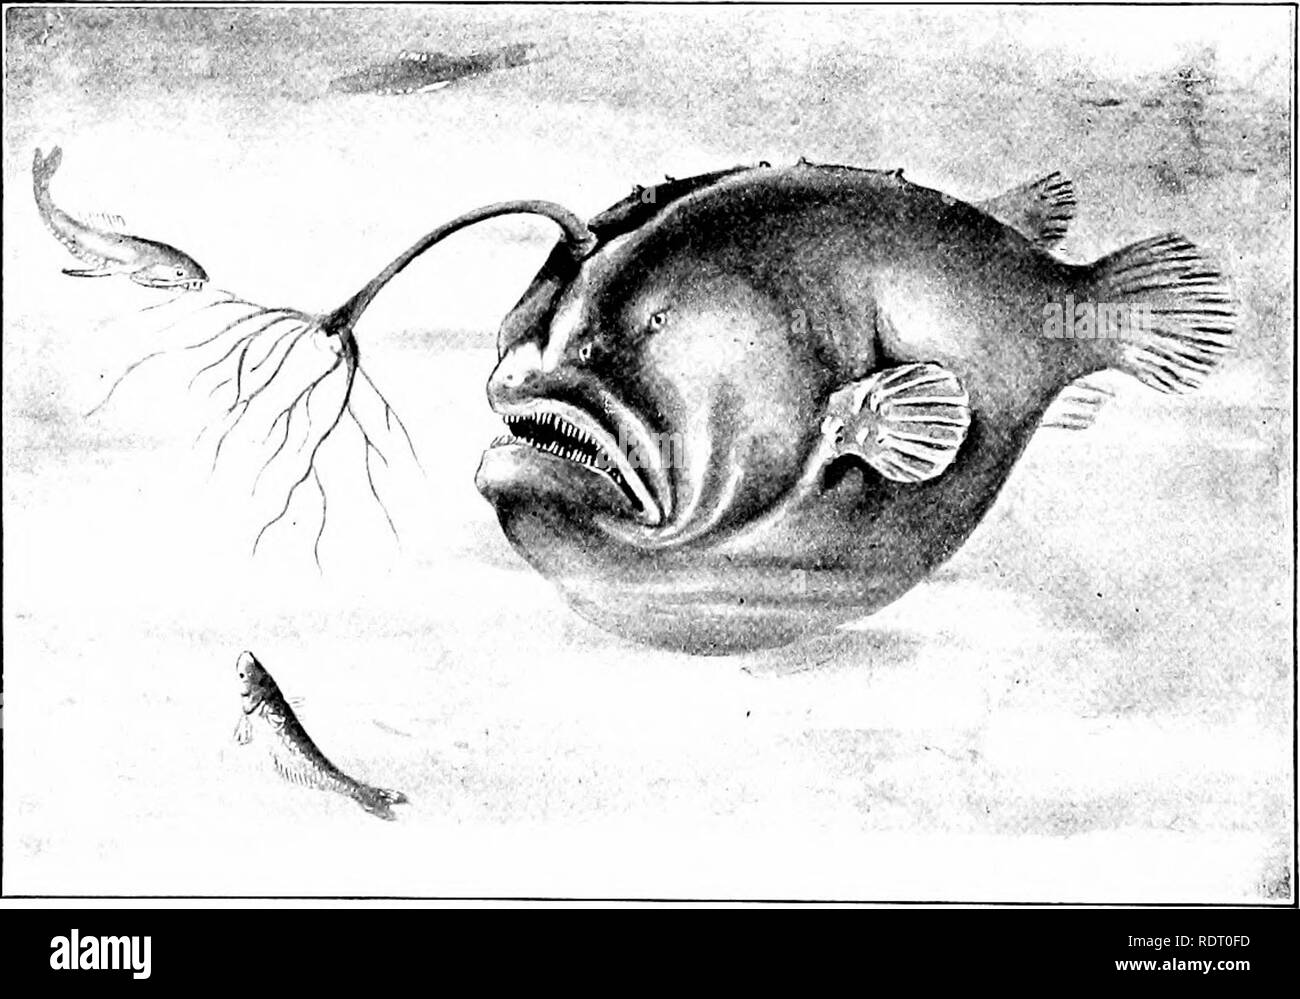 . Fishes. Fishes. 6o Adaptations of Fishes entiated areas round or oblong which shine star-Hke in the dark. These are usually symmetrically placed on the sides of &quot;W*'*'* *e.^ Fig. 44.—Headlight Fish, ^Ethoprora lucida Goode and Bean. Gulf Stream. the body. They may have also luminous glands or diffuse areas which are luminous, but which do not show the specialized structure of the phosphorescent spots. These glands of similar nature to the spots are mostly on the head or tail. In one. FiG. i5.—Corynnlop}mx rcinhnrdti (Liitkon), showing luminous liulb (modified after Liitken). Family Cera Stock Photo